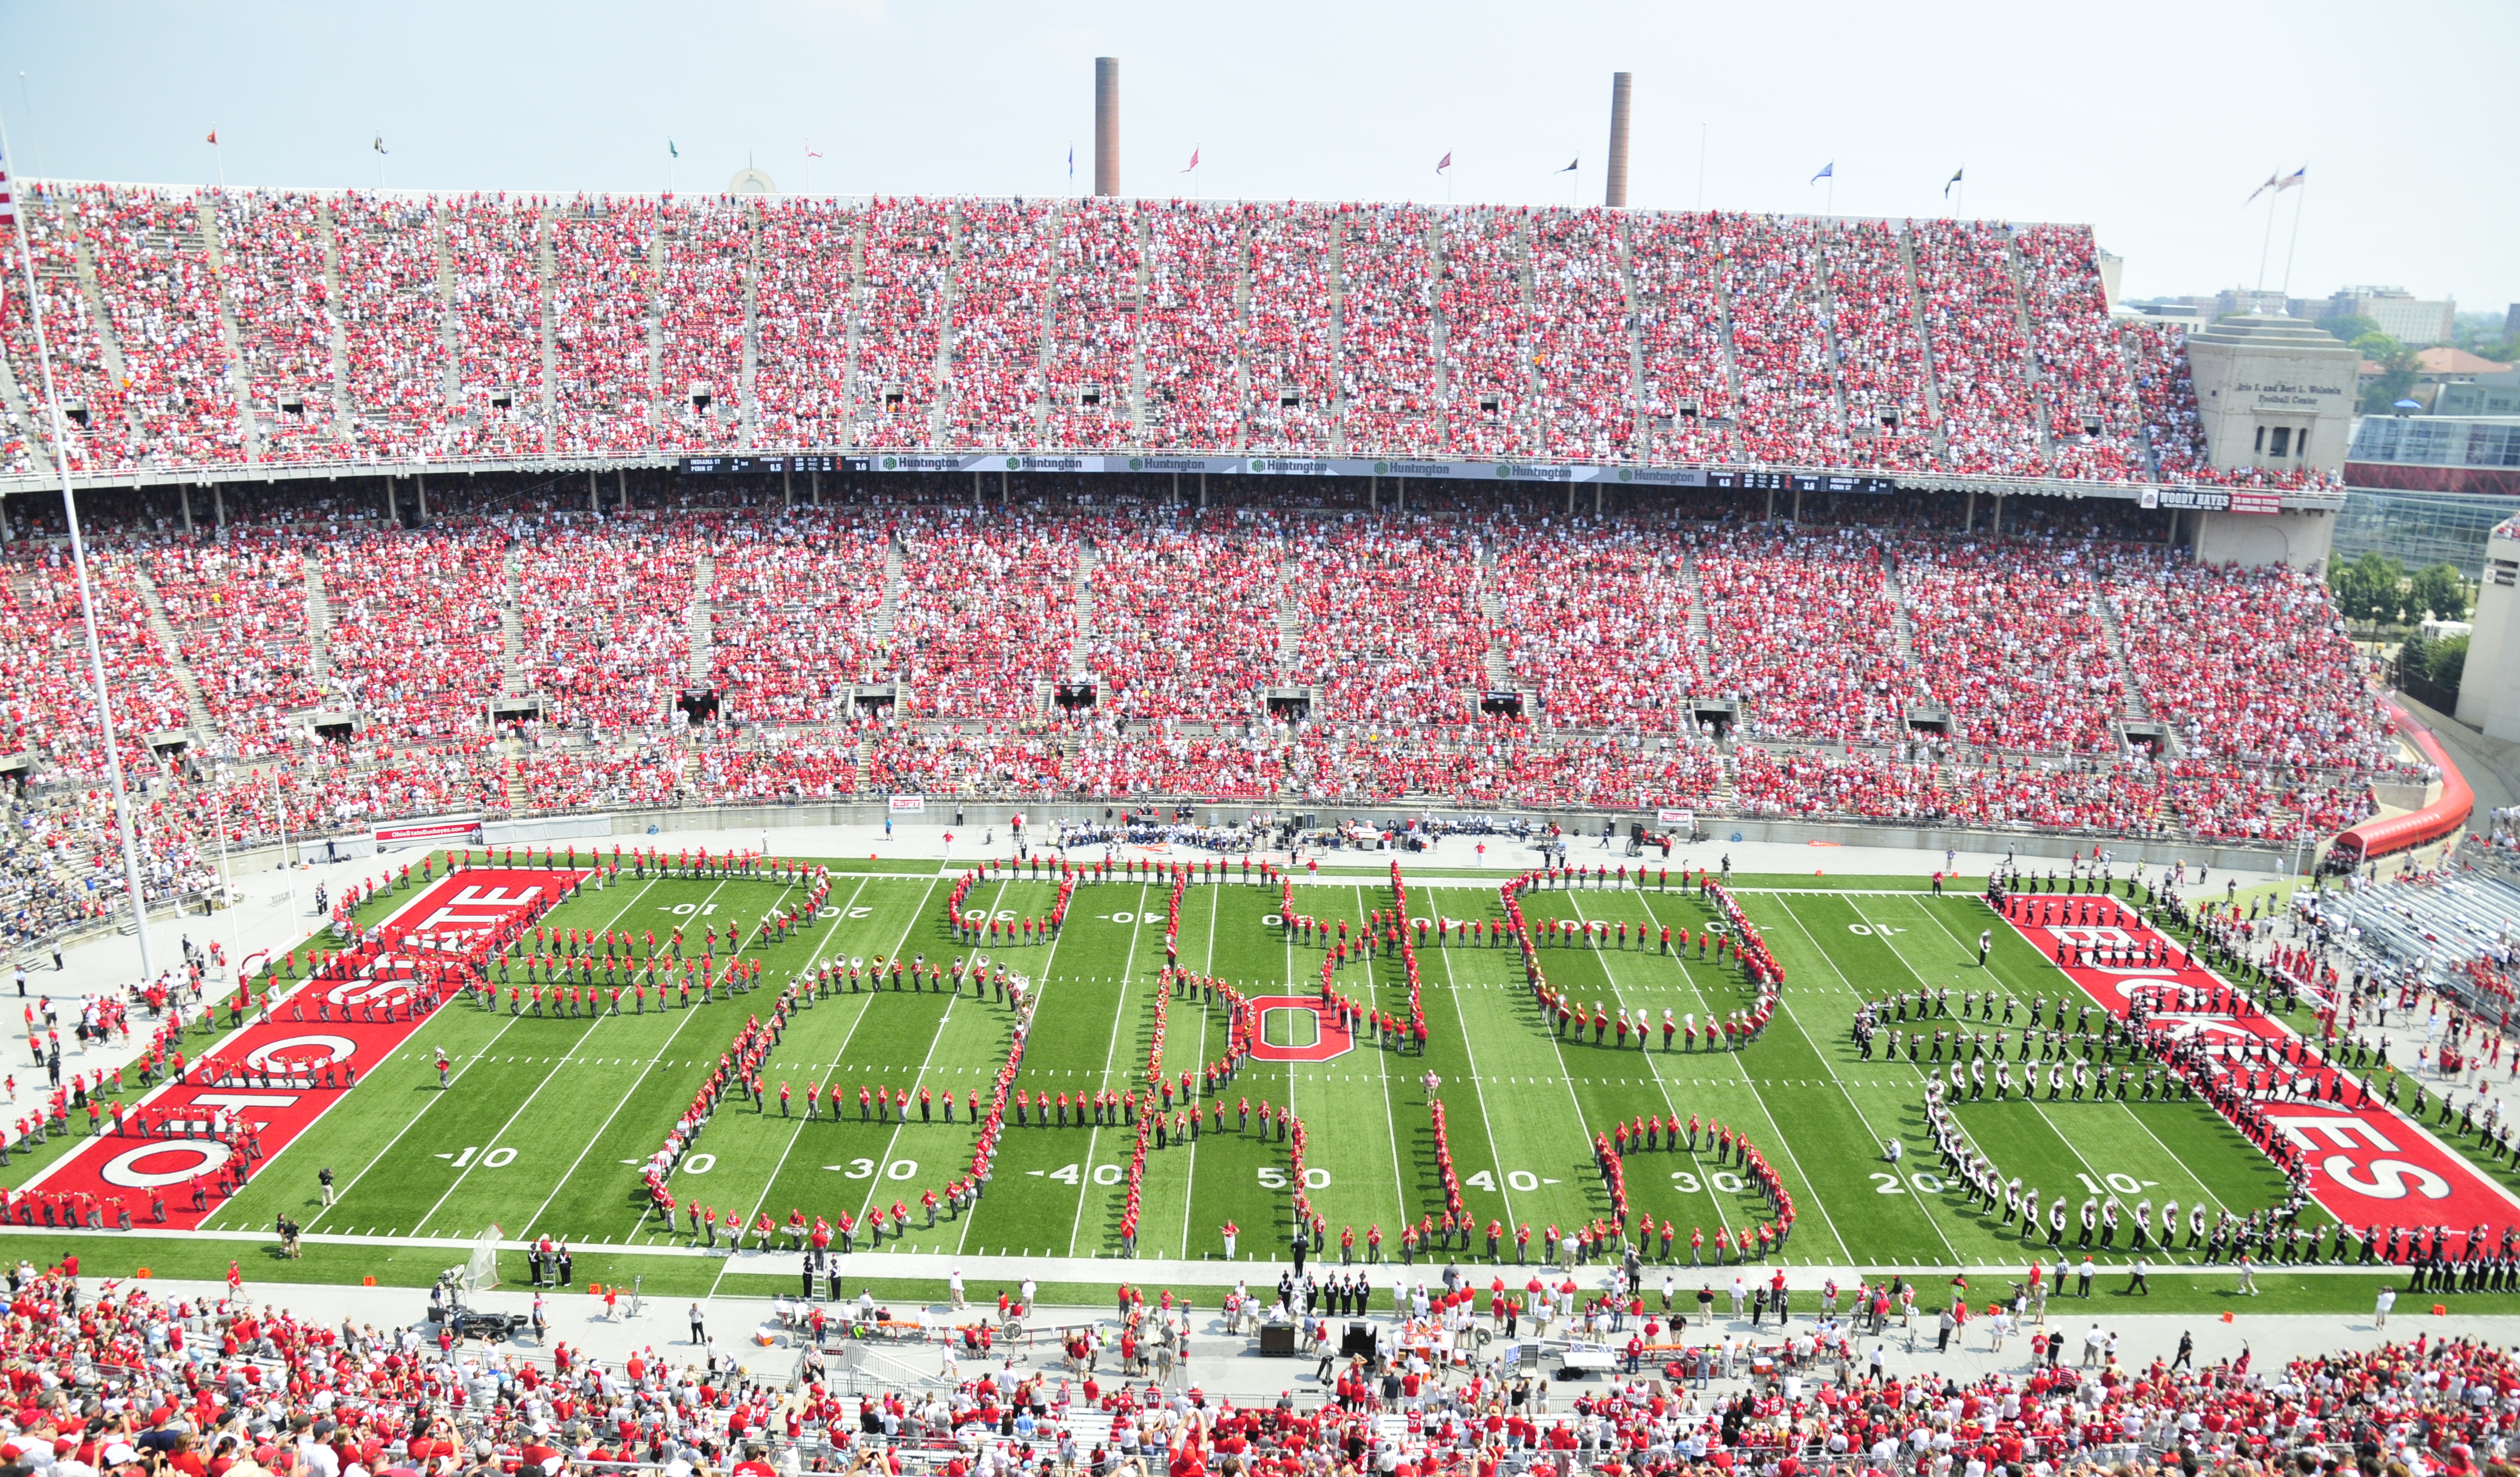 The Ohio State University marching band performs  Script Ohio  during half time during a game with the Akron Zips at Ohio Stadium in Columbus, Ohio on Sept. 3, 2011.